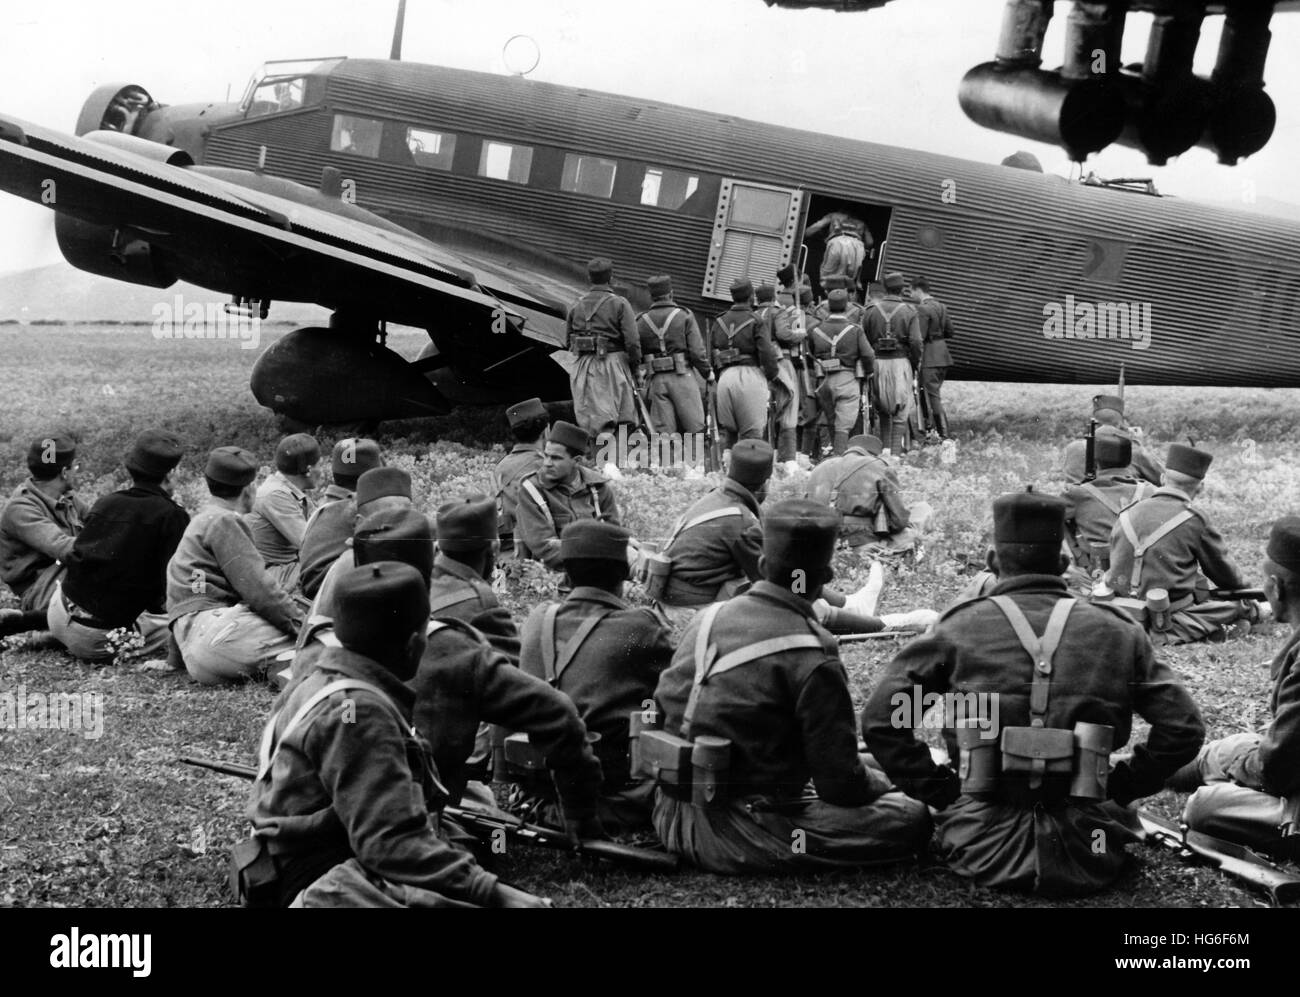 The Nazi propganda picture shows how the German production company UFA shoots a film about the Spanish Civil War in Tetuán, Mexico, Apri 1939, after Francos seizure of power. The photo depicts the opening scene of the movie, where Spanish-Moroccan colonial troops enter a German cargo aircraft, type Junkers Ju 52 in . Fotoarchiv für Zeitgeschichtee - NO WIRE SERVICE - | usage worldwide Stock Photo